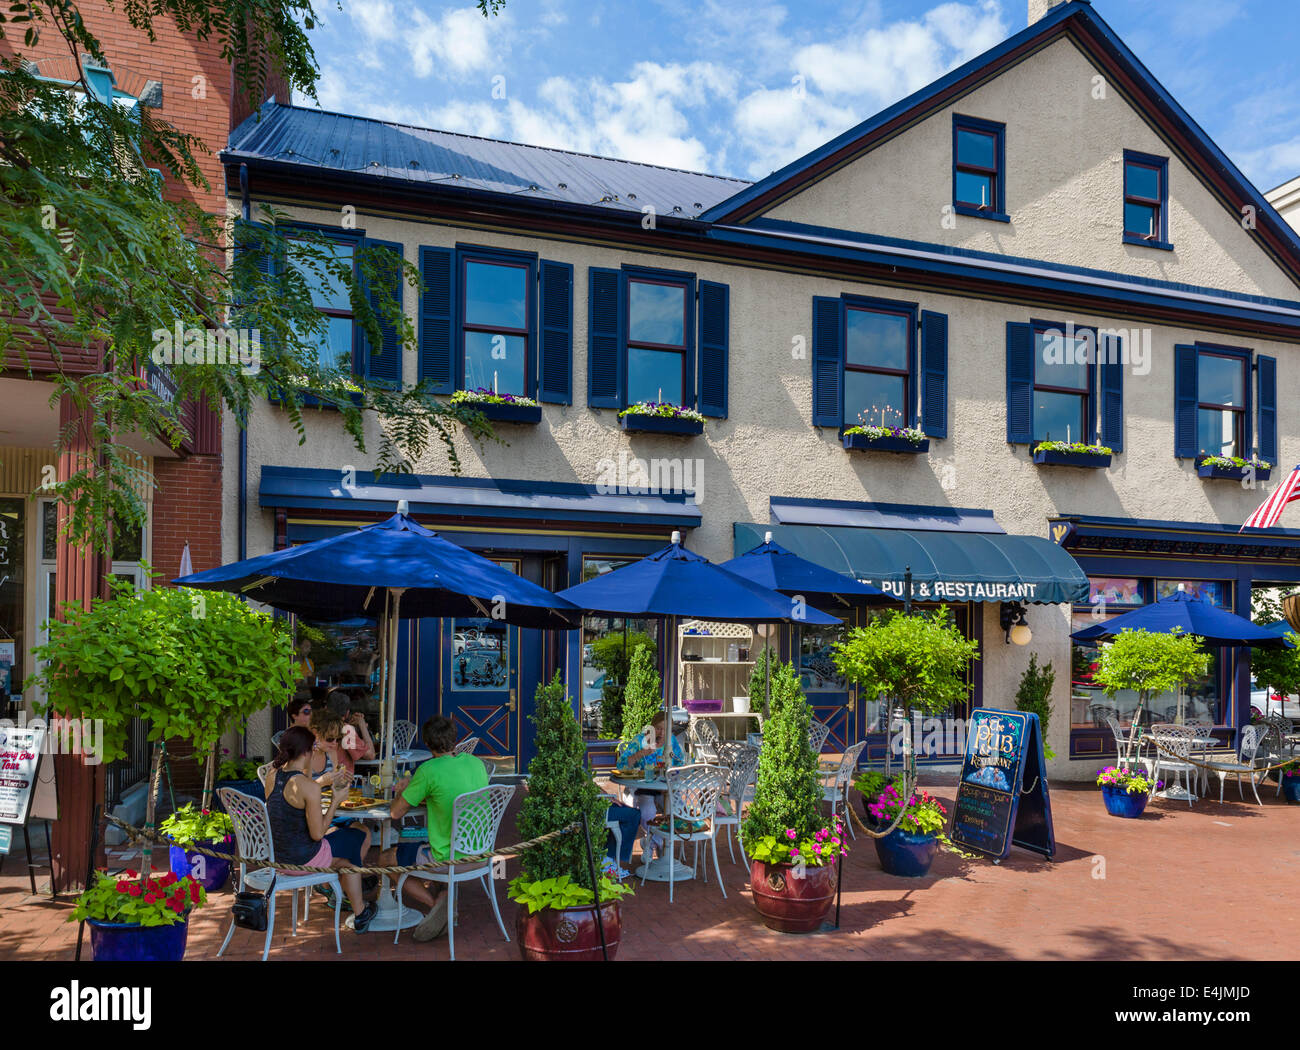 Pub and restaurant on Lincoln Square in dowtown Gettysburg, Adams County, Pennsylvania, USA Stock Photo